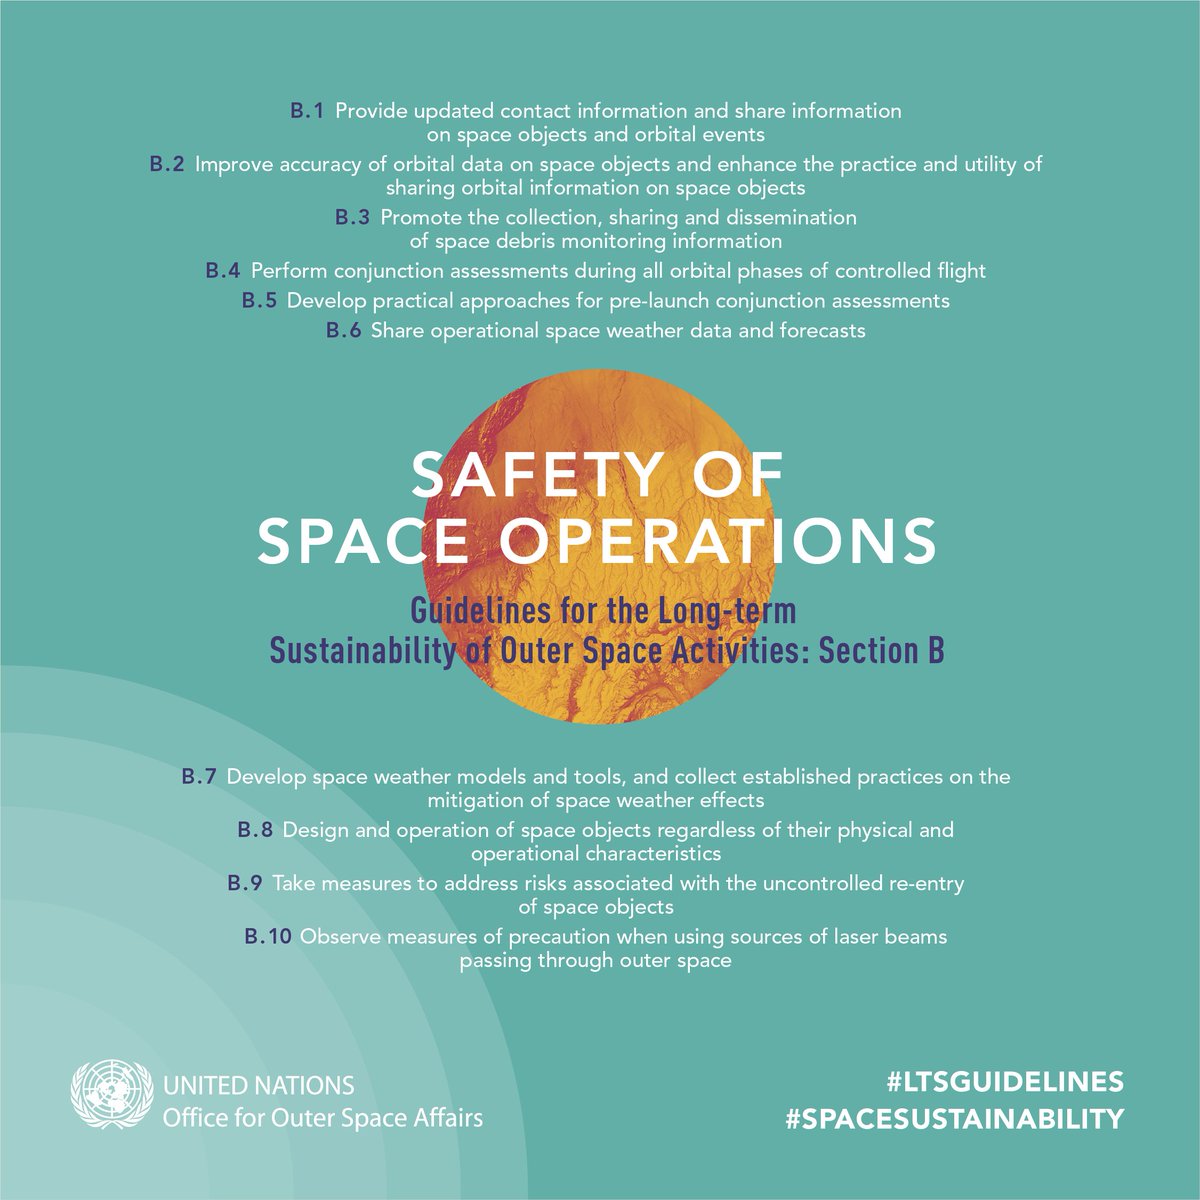 🌌👩‍🎓👨‍🎓Training opportunity🚀 Want to learn more about space objects, orbital events, #LTSGuidelines implementation & publicly available space situational awareness tools? 👀 Register and see the agenda here: ➡️ spacesustainability.unoosa.org/content/events… 🗓️3 June at 16:00 or 4 June at 09:00 (CET)